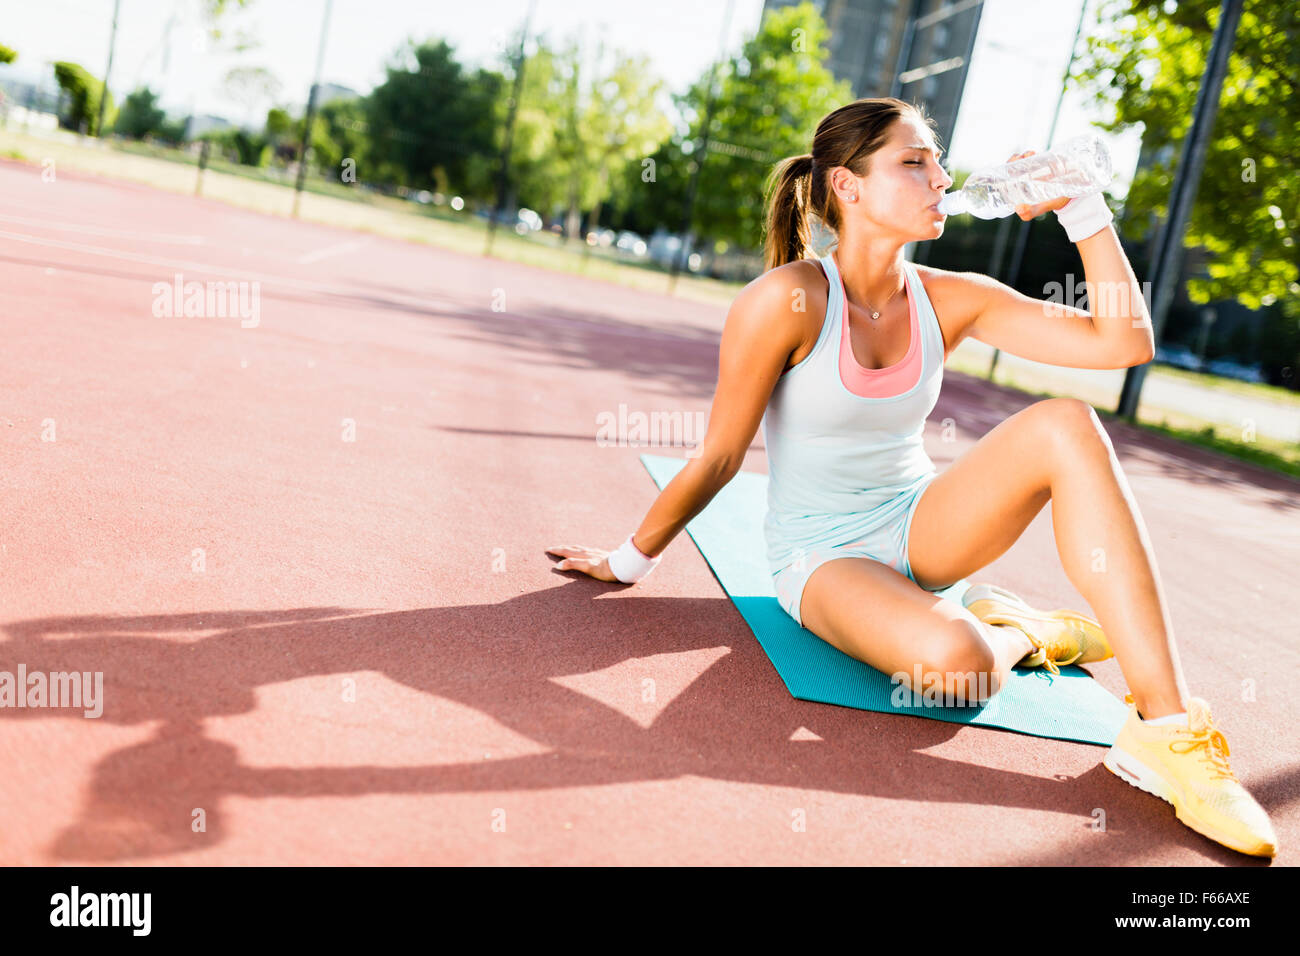 Young beautiful woman drinking water after exercise in a city training court on a sunny day Stock Photo